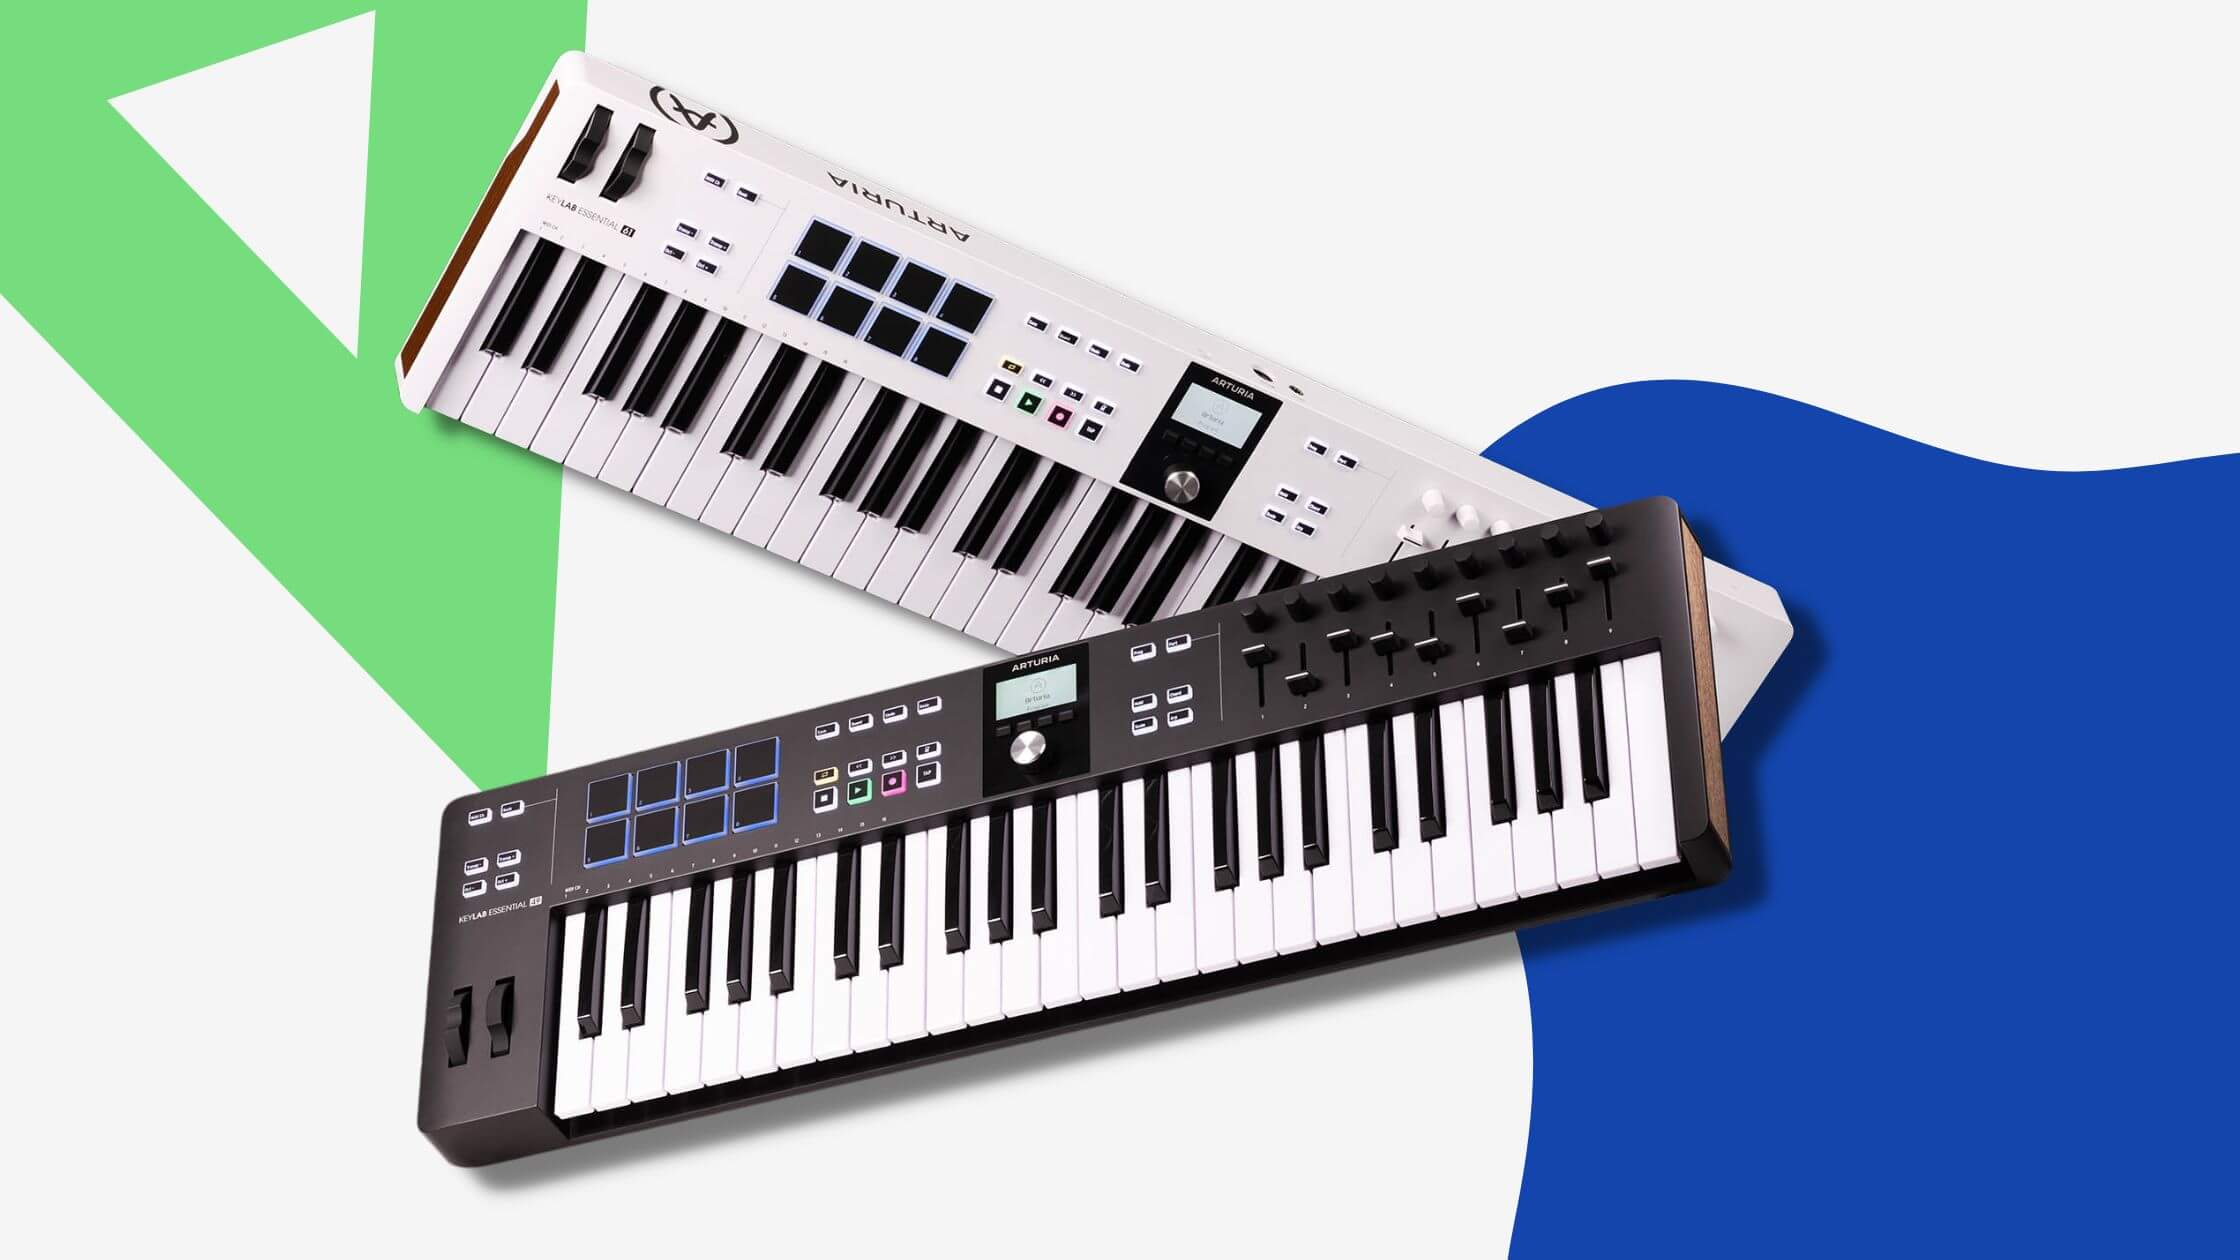 Arturia release KeyLab Mk3 – a slick new look, smooth workflow, and lots of versatility for modern producers